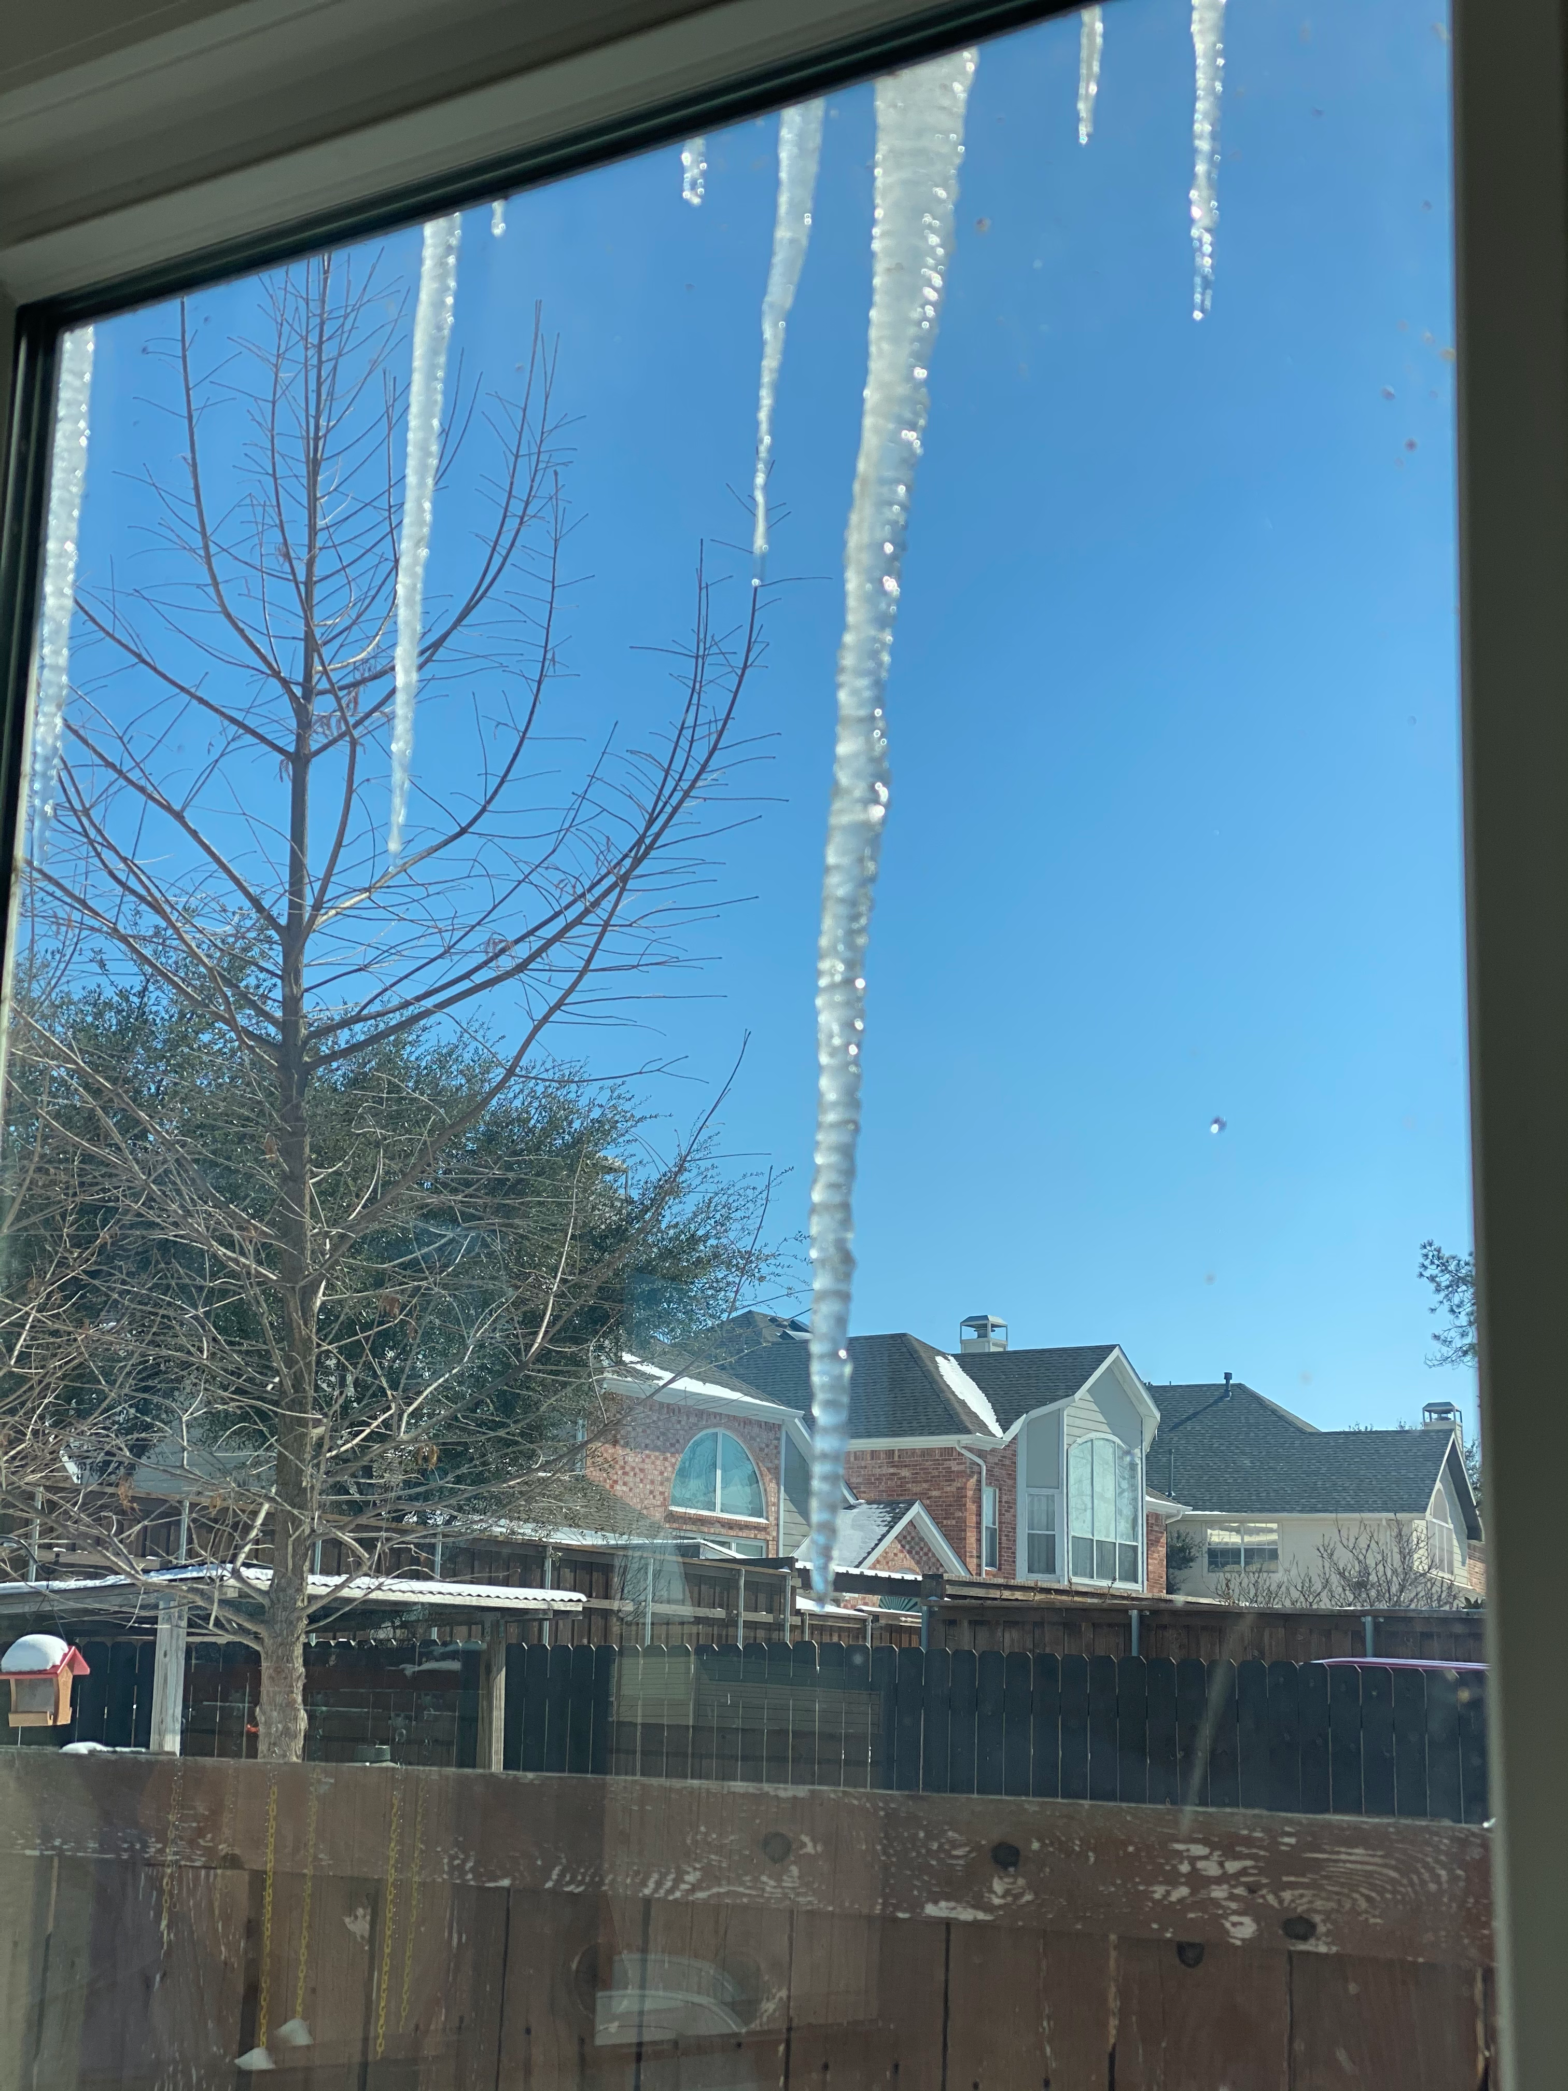 Icicles as seen from a house window during the Texas Winter Storm of 2021